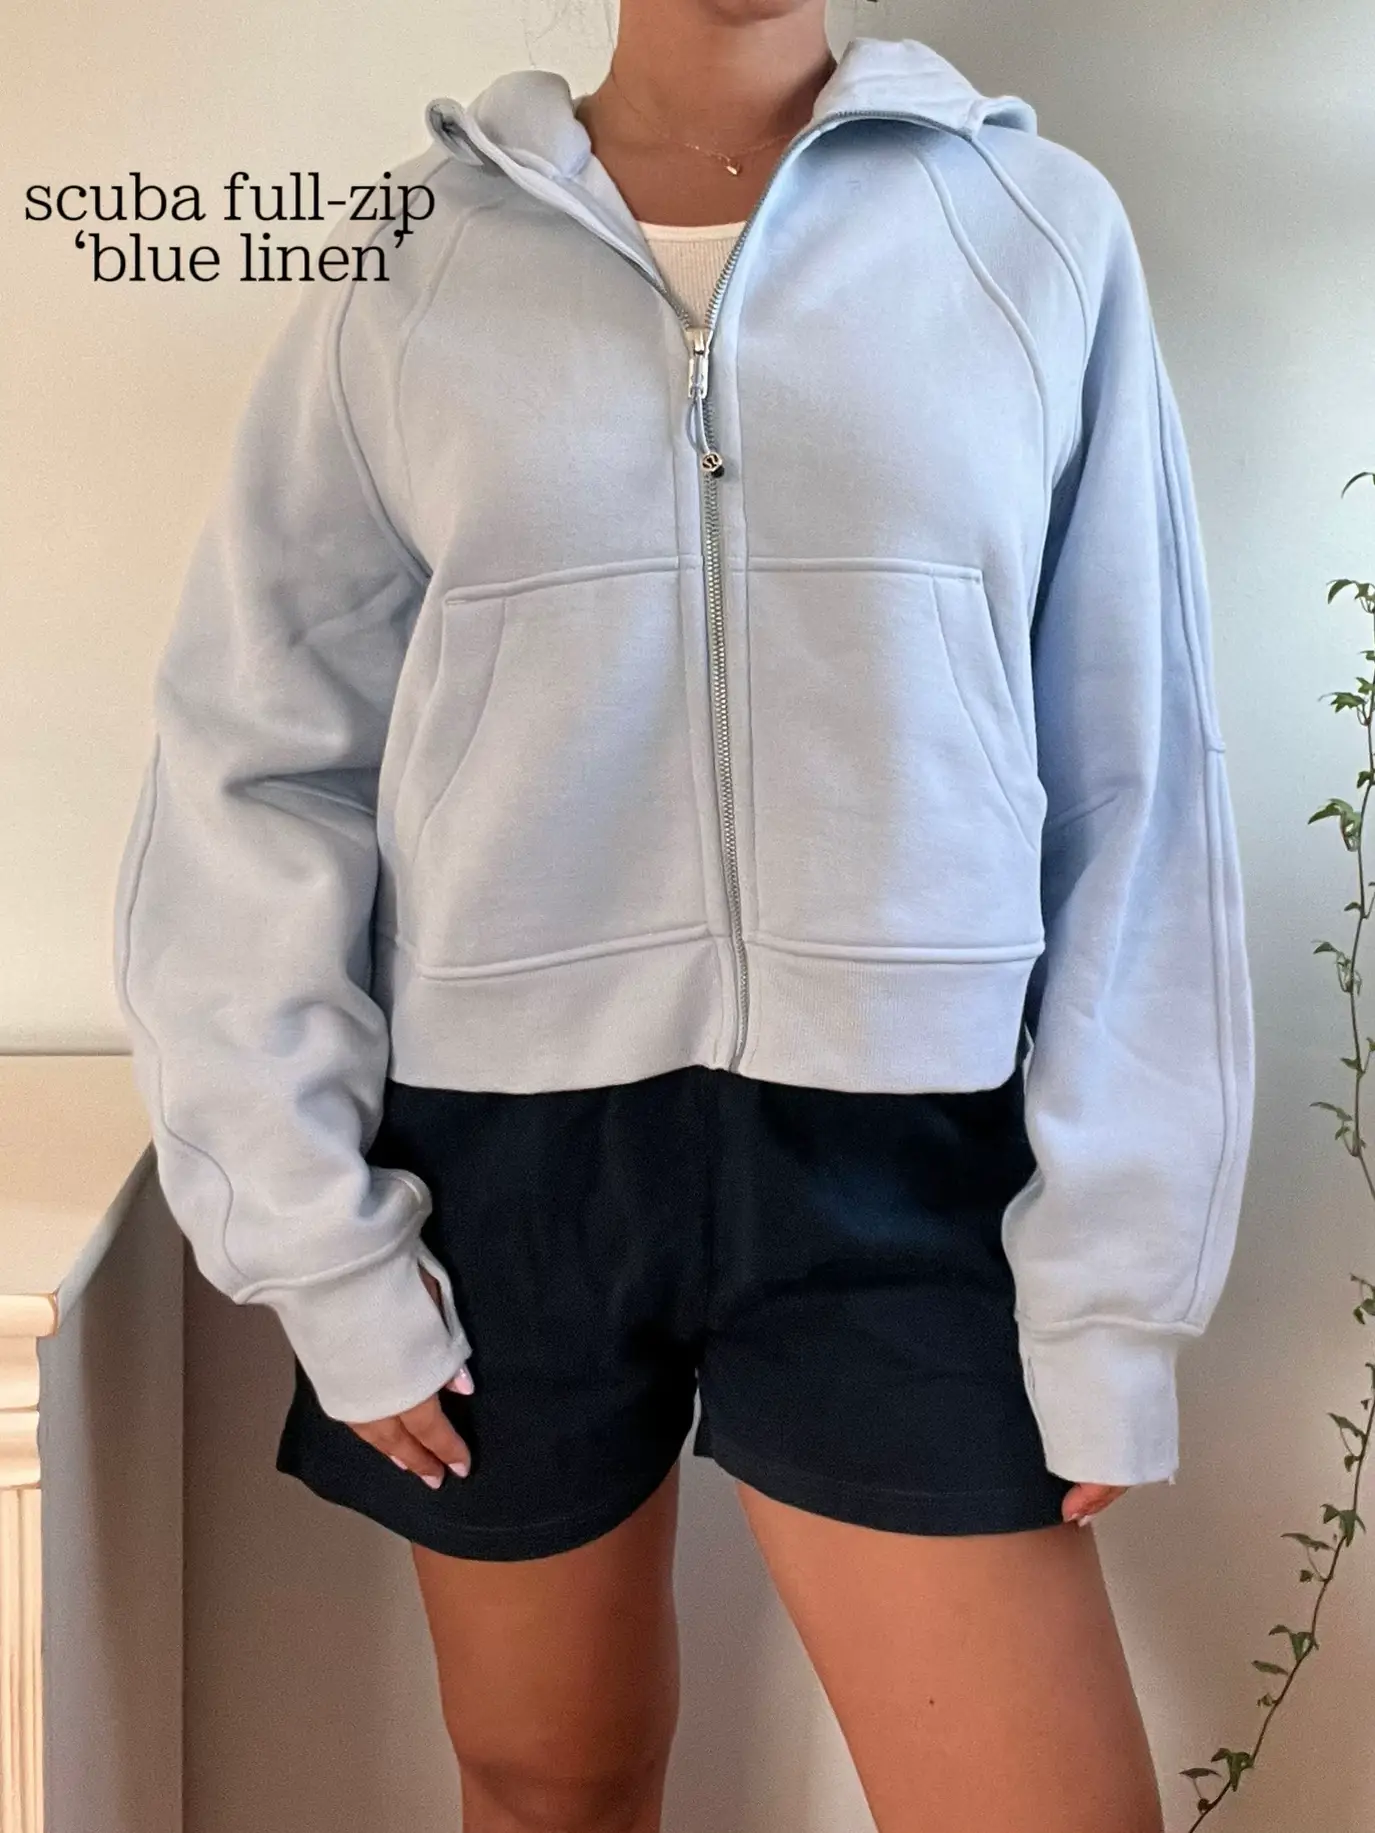 I bring thee another Lululemon dupe from . 😜 This jacket from   ($48) is a dead match to the lululemon scuba hoodie which